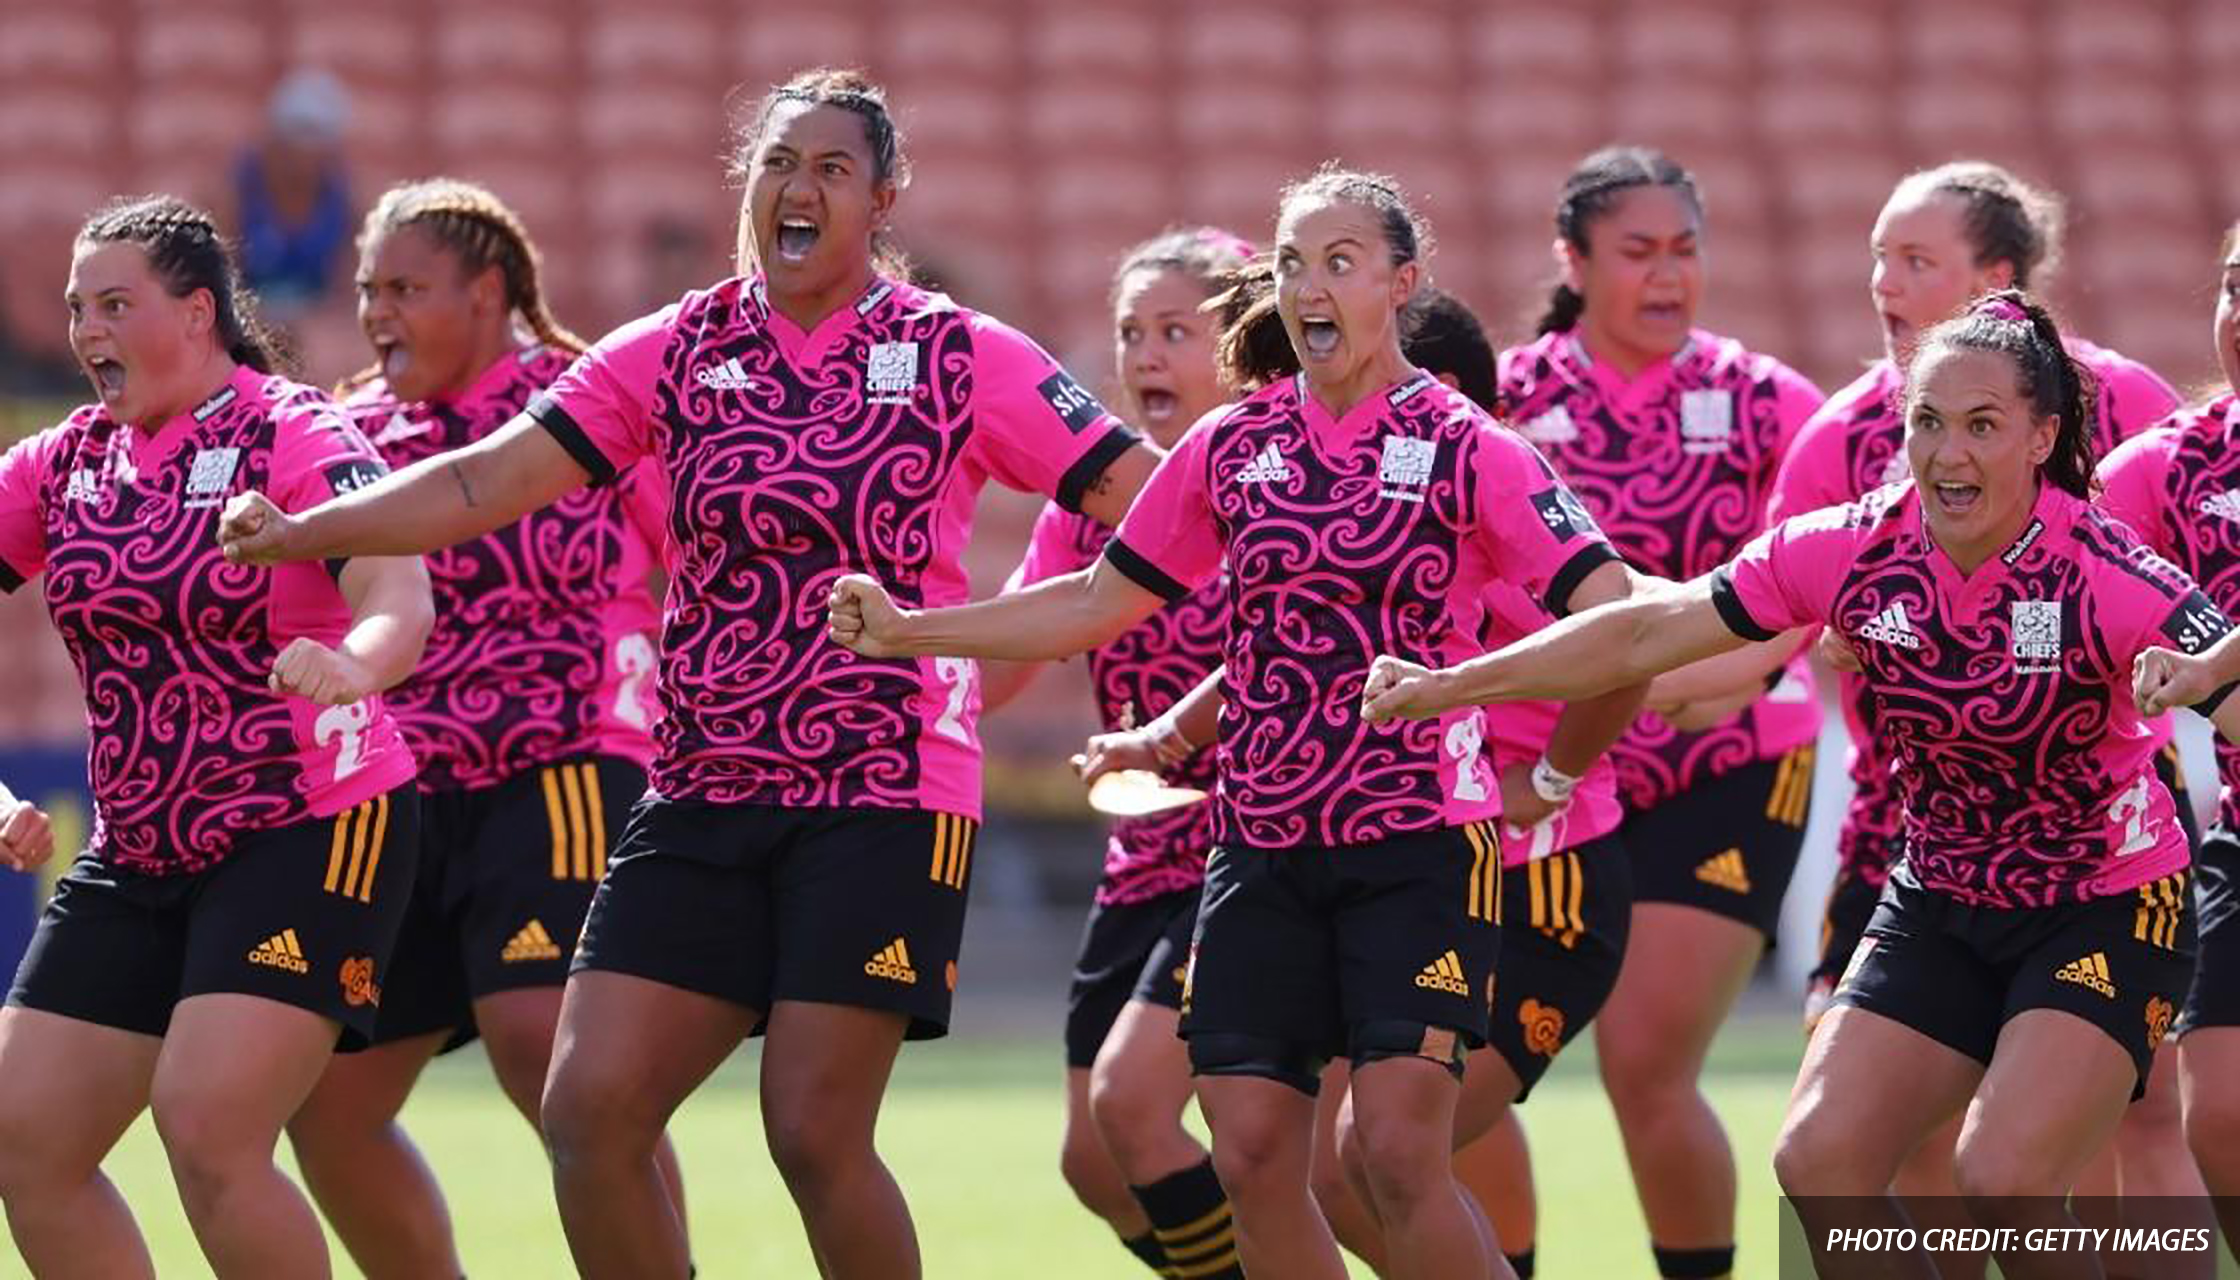 Featured Image for “Support for Manawa Waikato Women’s Rugby Team”